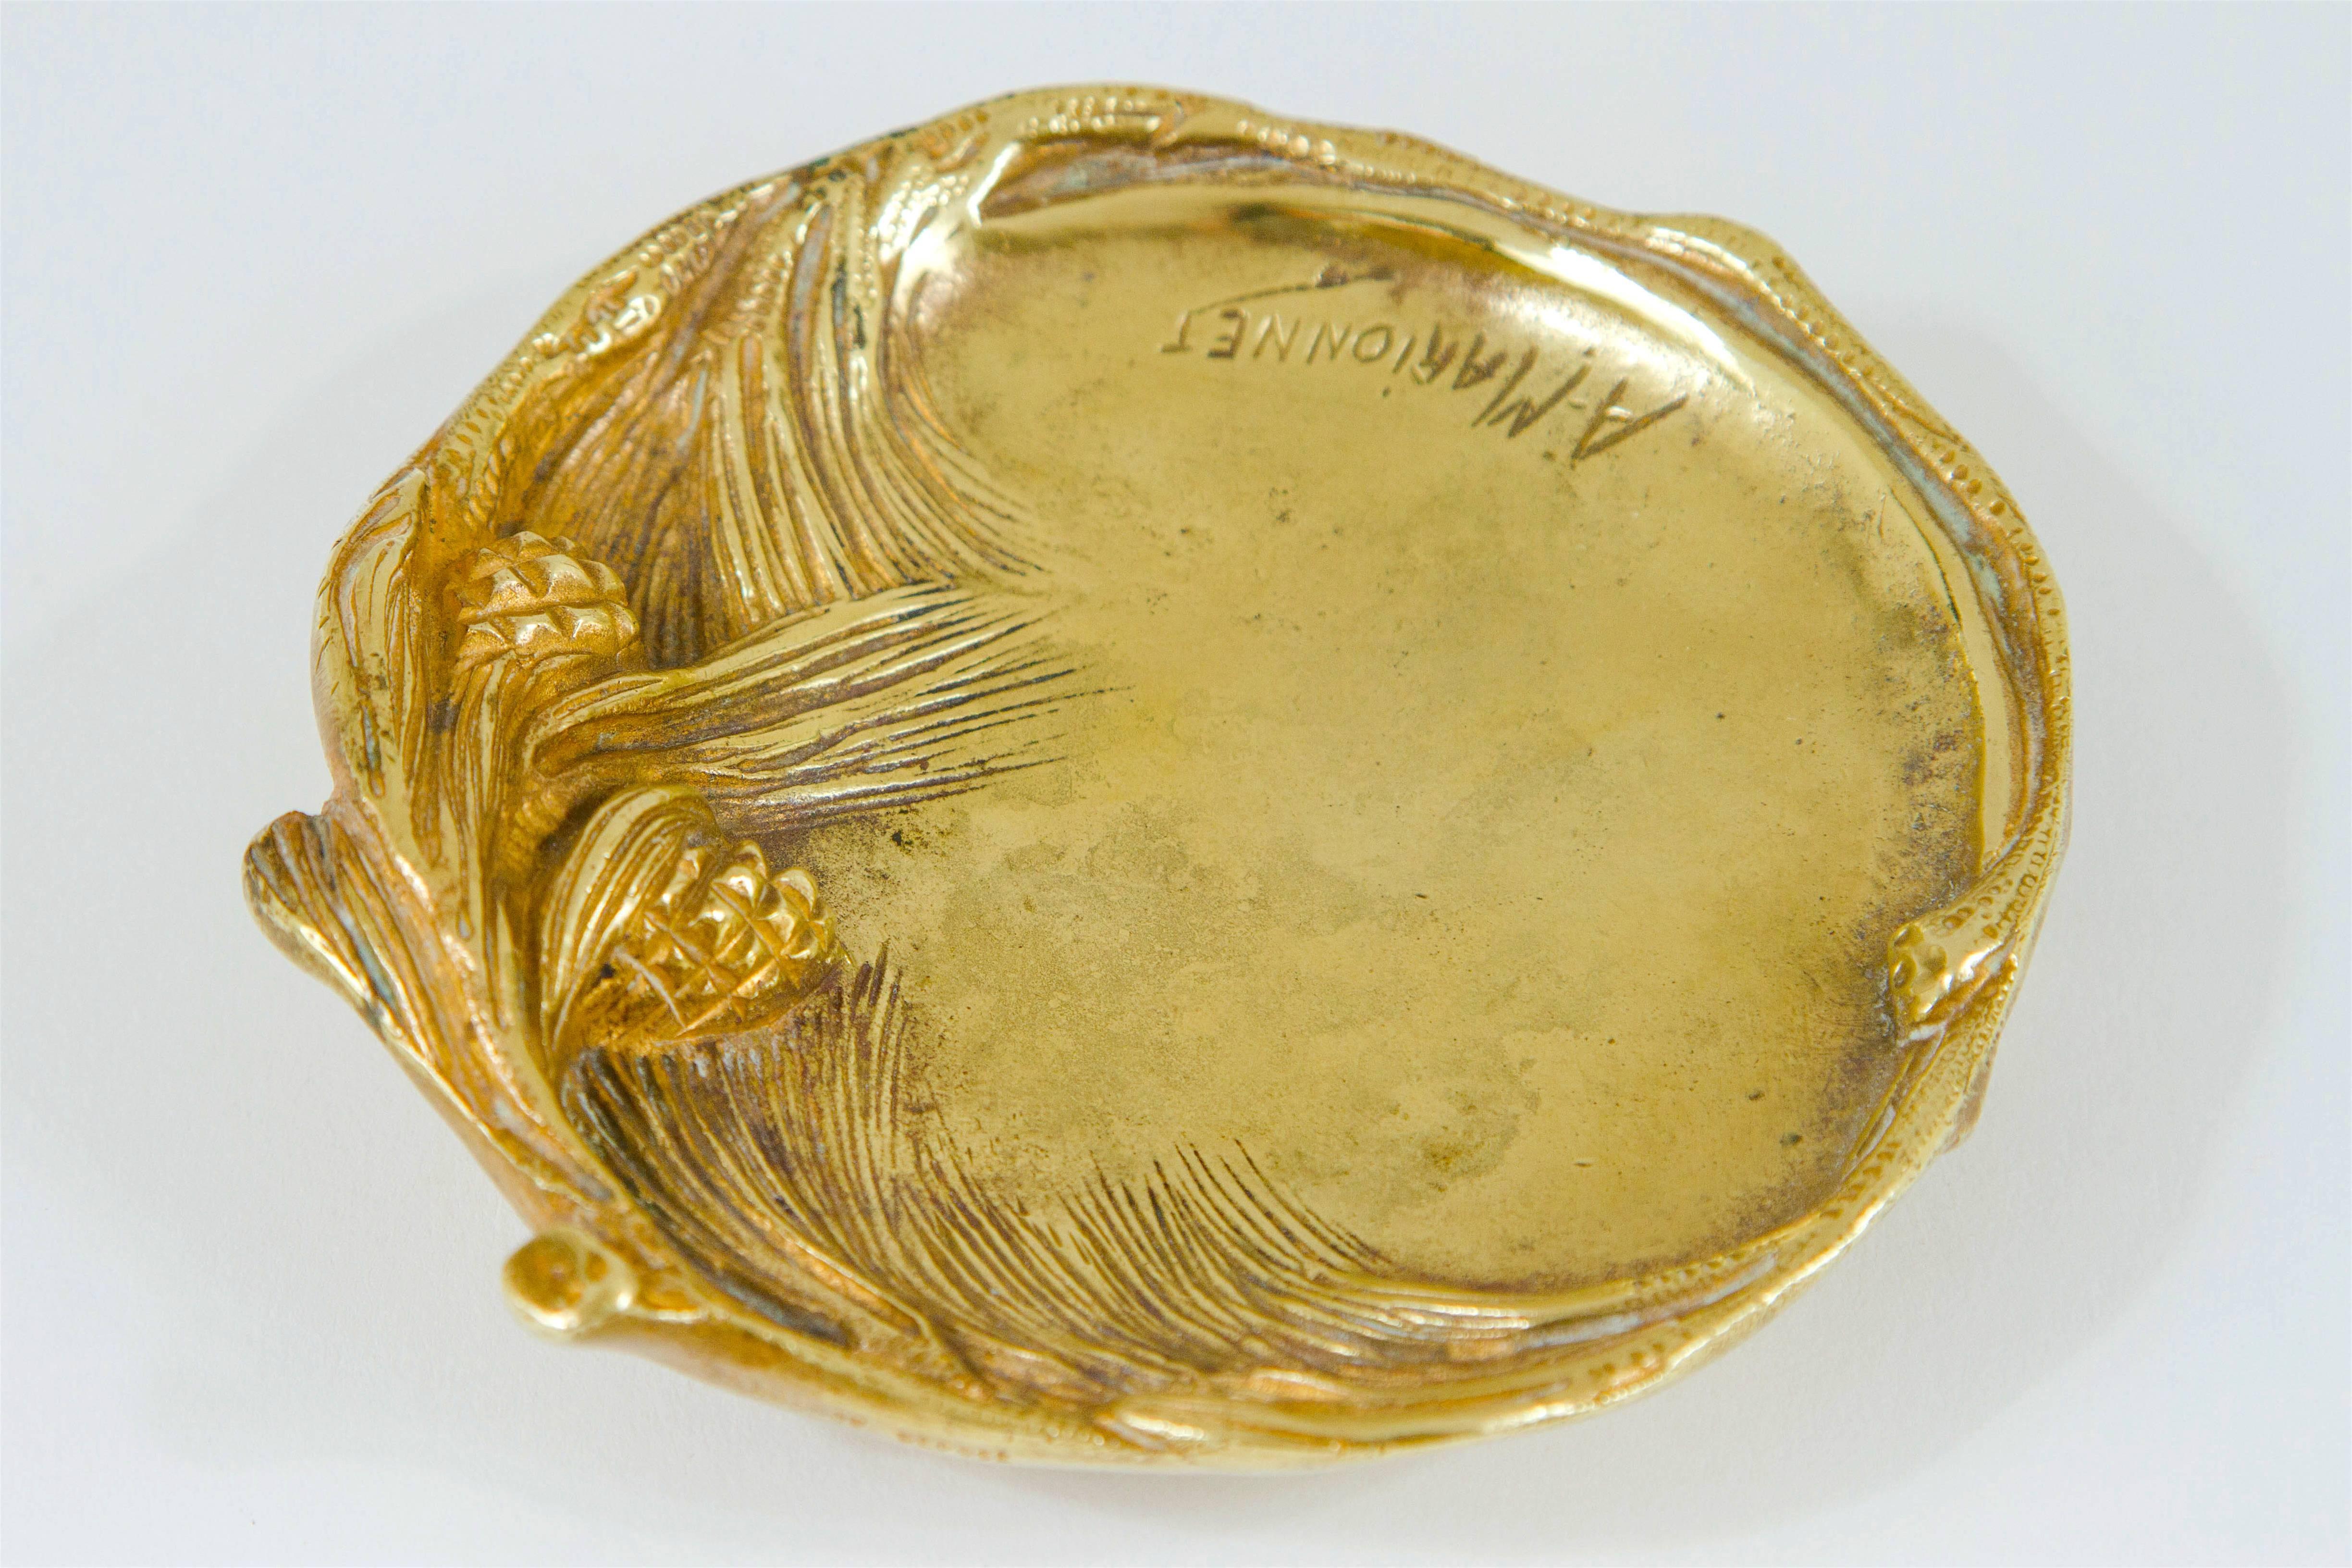 A lovely late 19th-early 20th century antique vide poche (translates to empty pockets for keys, change, etc.) in gilt bronze by French artist and sculptor Albert Marionnet (1852-1910). Resting on four feet, the dish is encircled by detailed natural